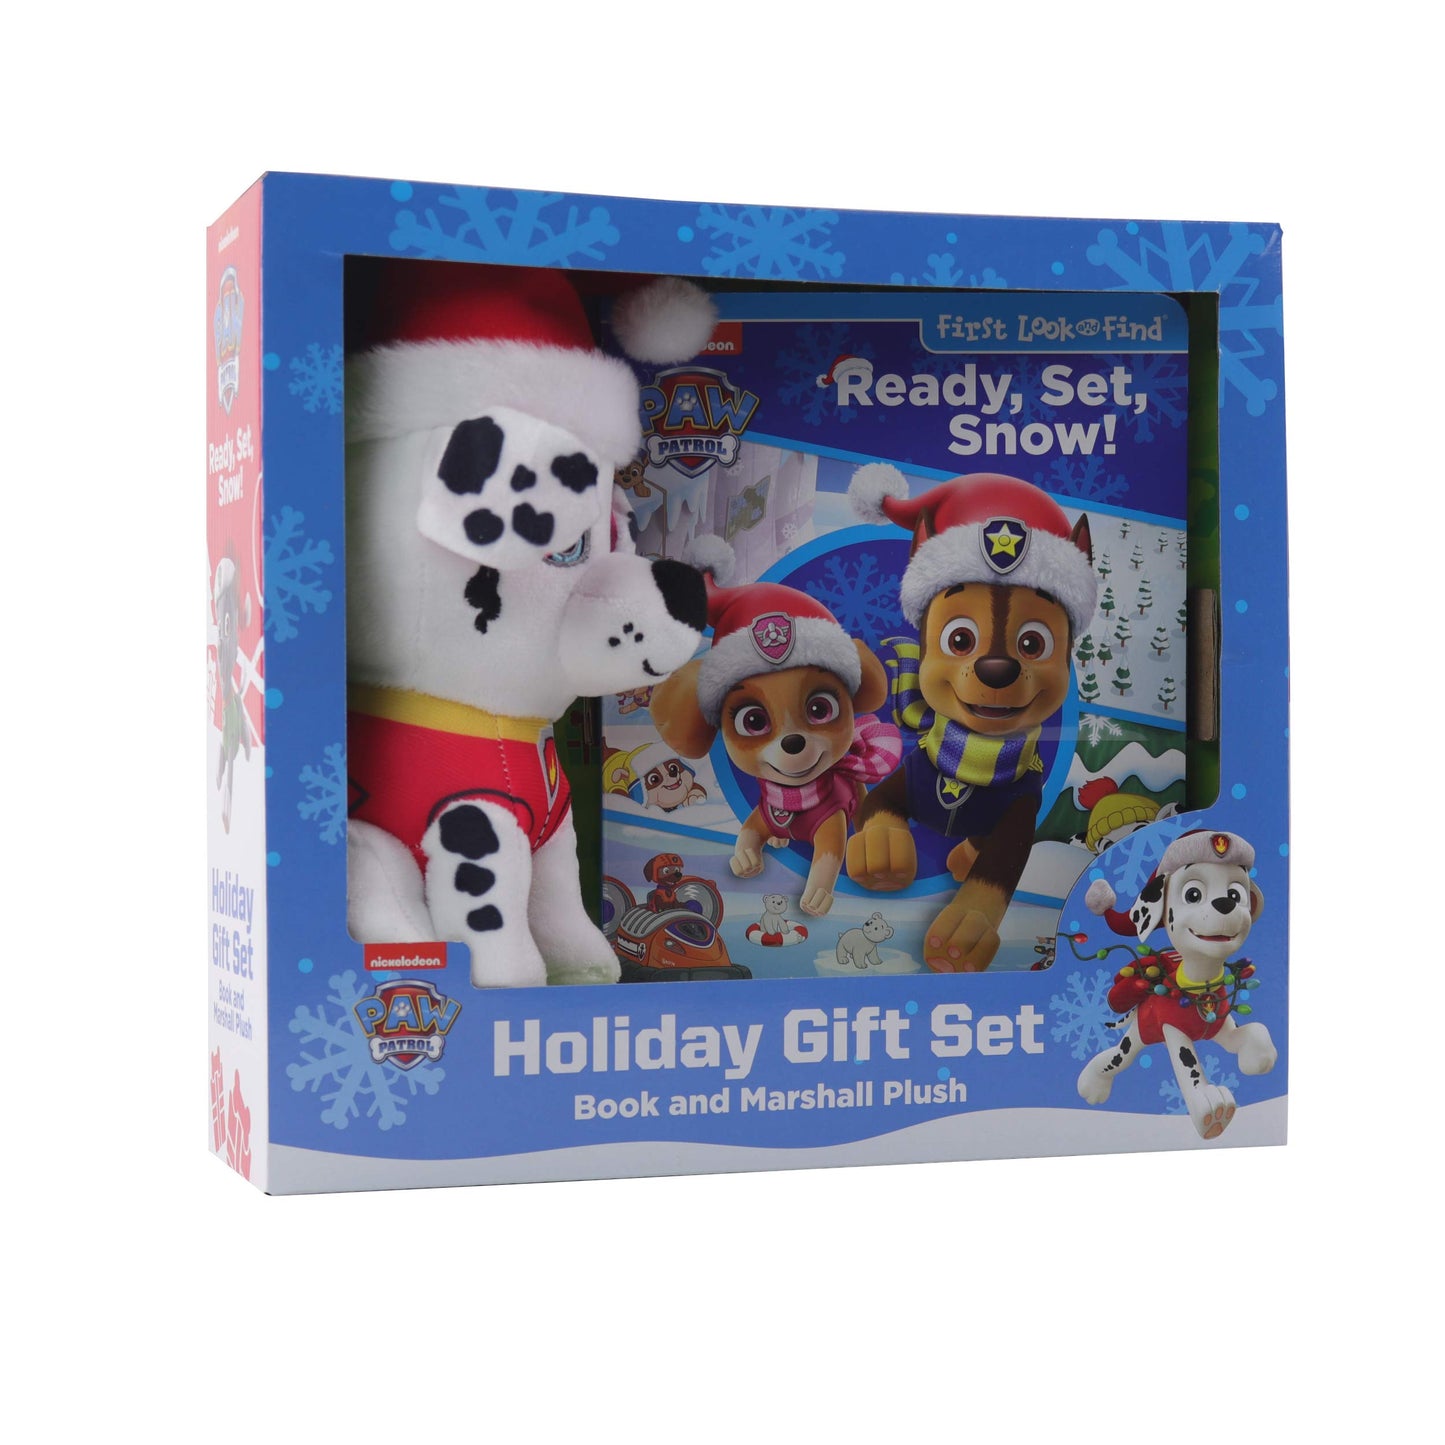 Nickelodeon Paw Patrol Book & Plush - Ready, Set, Snow! Holiday Gift Set - First Look and Find Activity Book with Marshall Plush! Board book